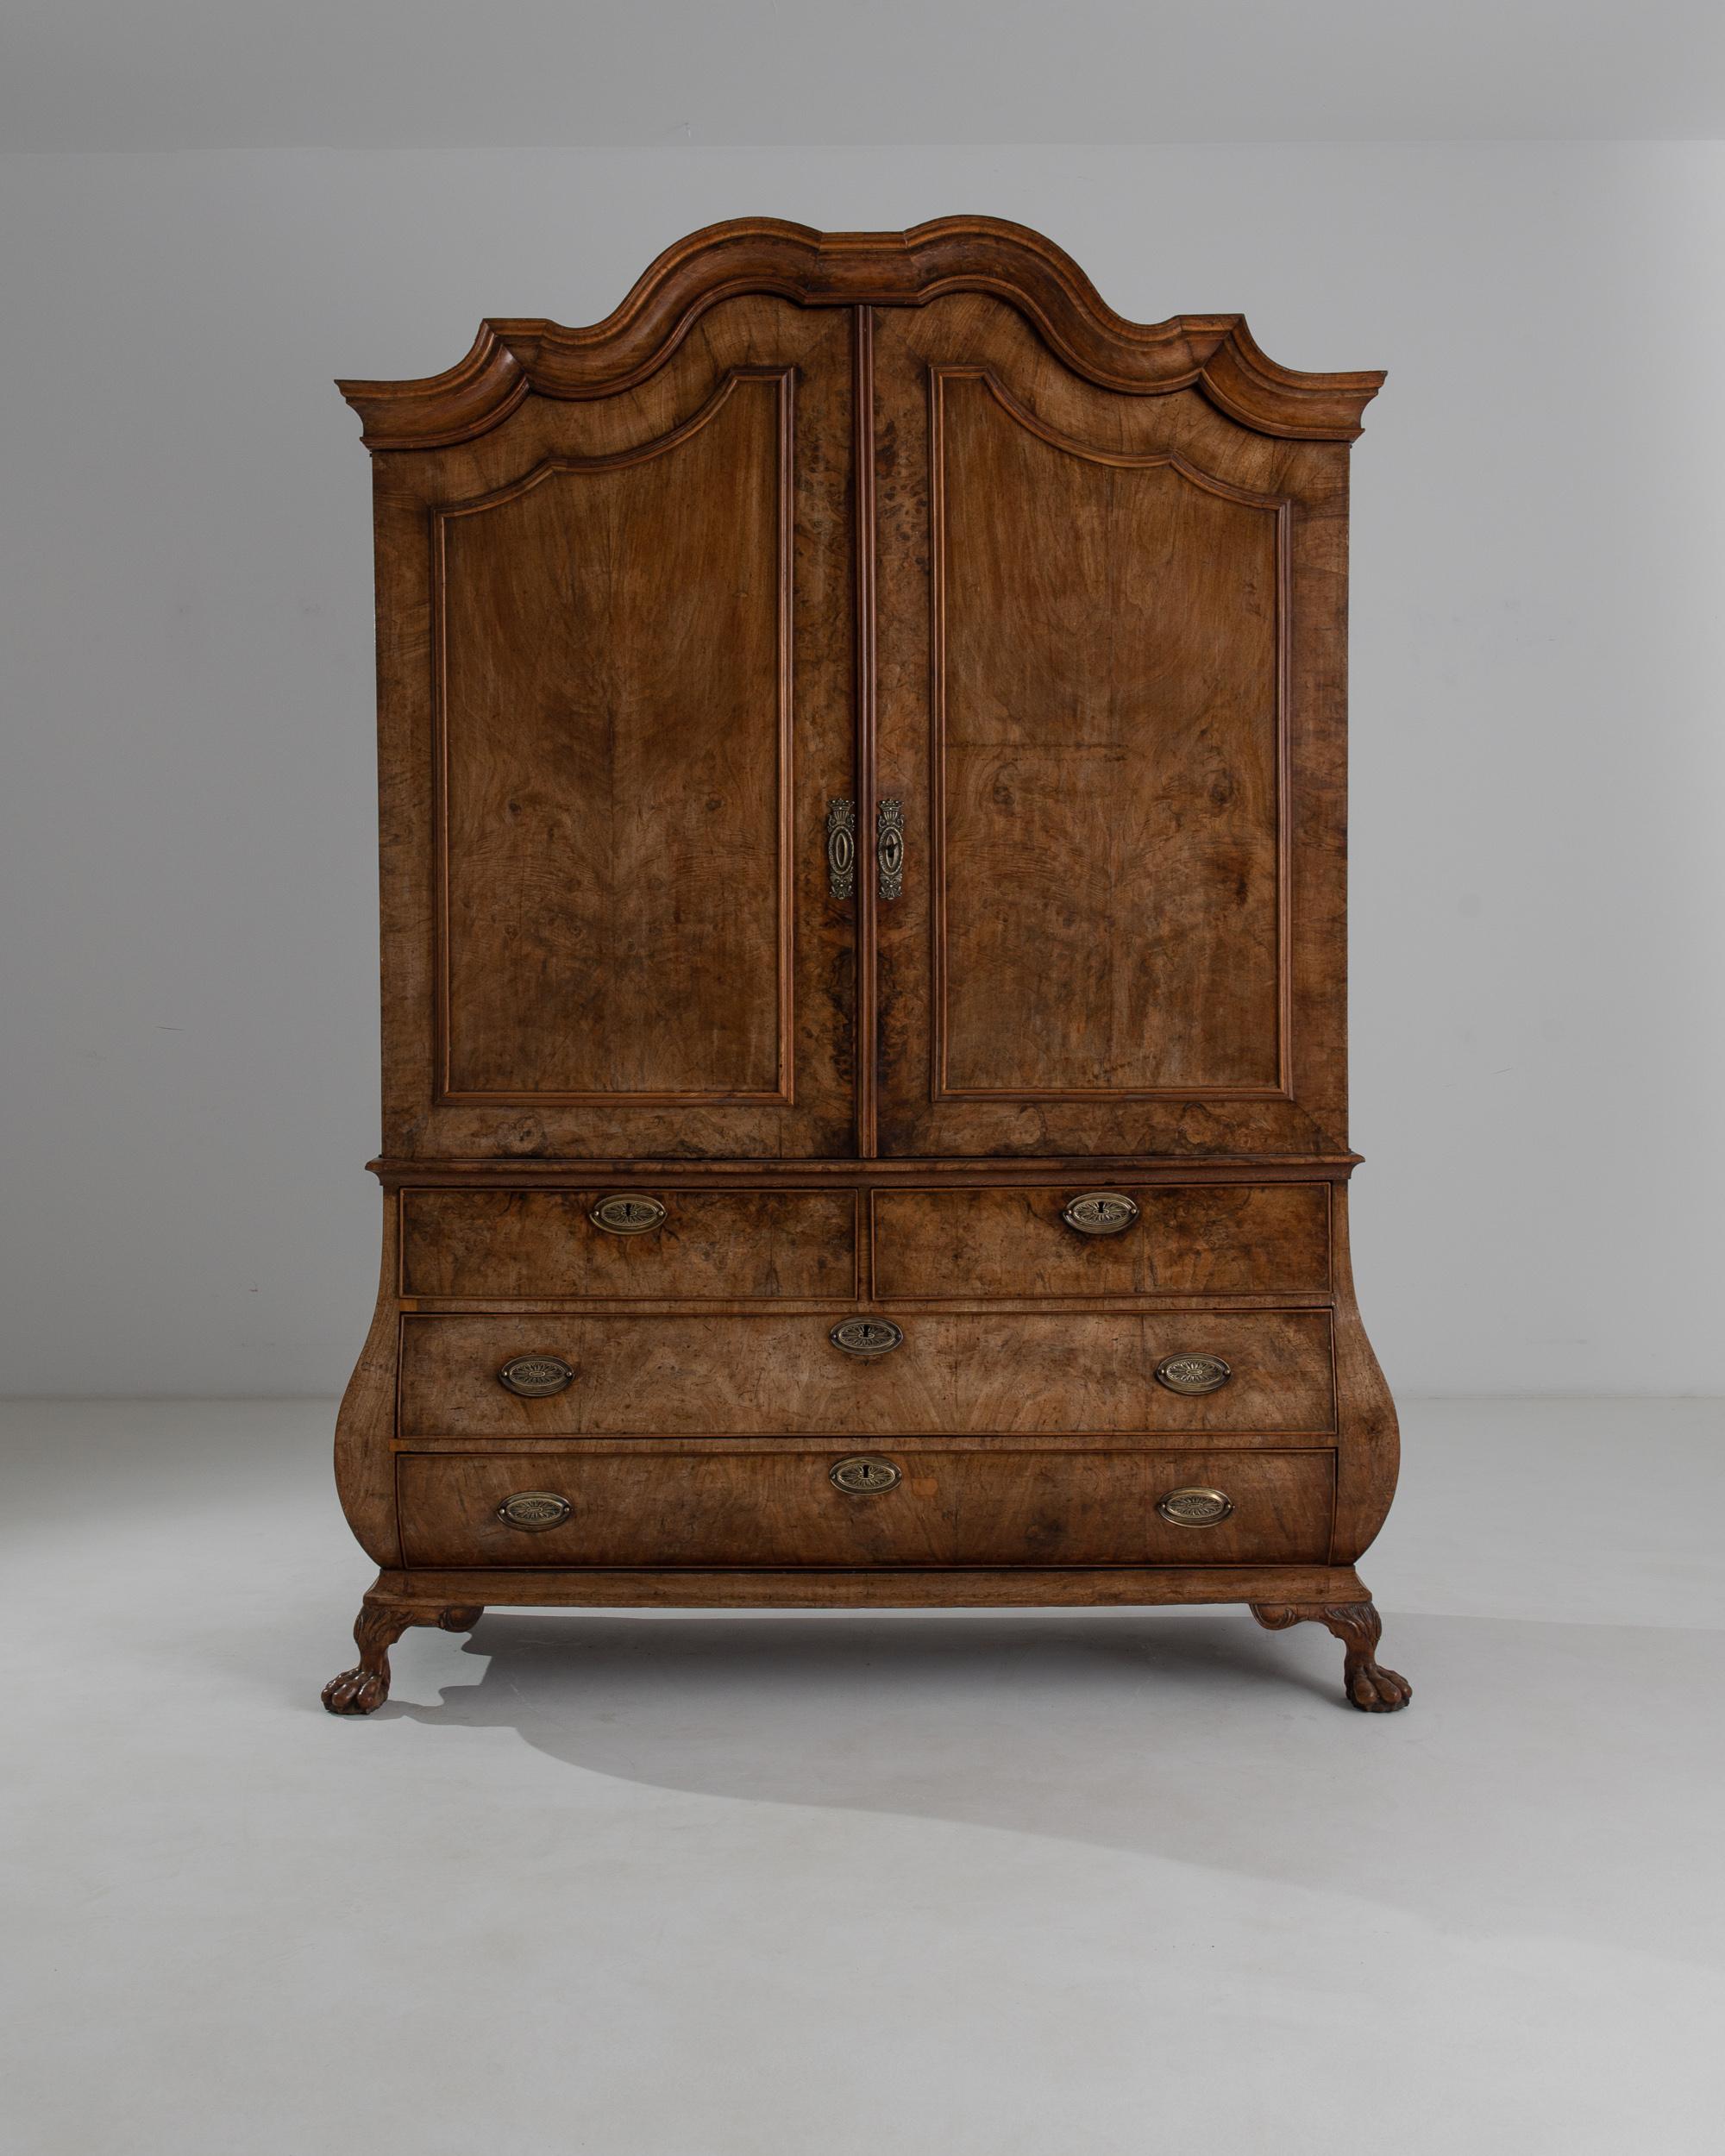 Built in the Netherlands circa 1800, the masterful construction of this antique wooden cabinet has lost none of its power to impress. The silhouette is bold yet sensuous: above, a sinuous molded cornice cascades in dramatic curves, while below a